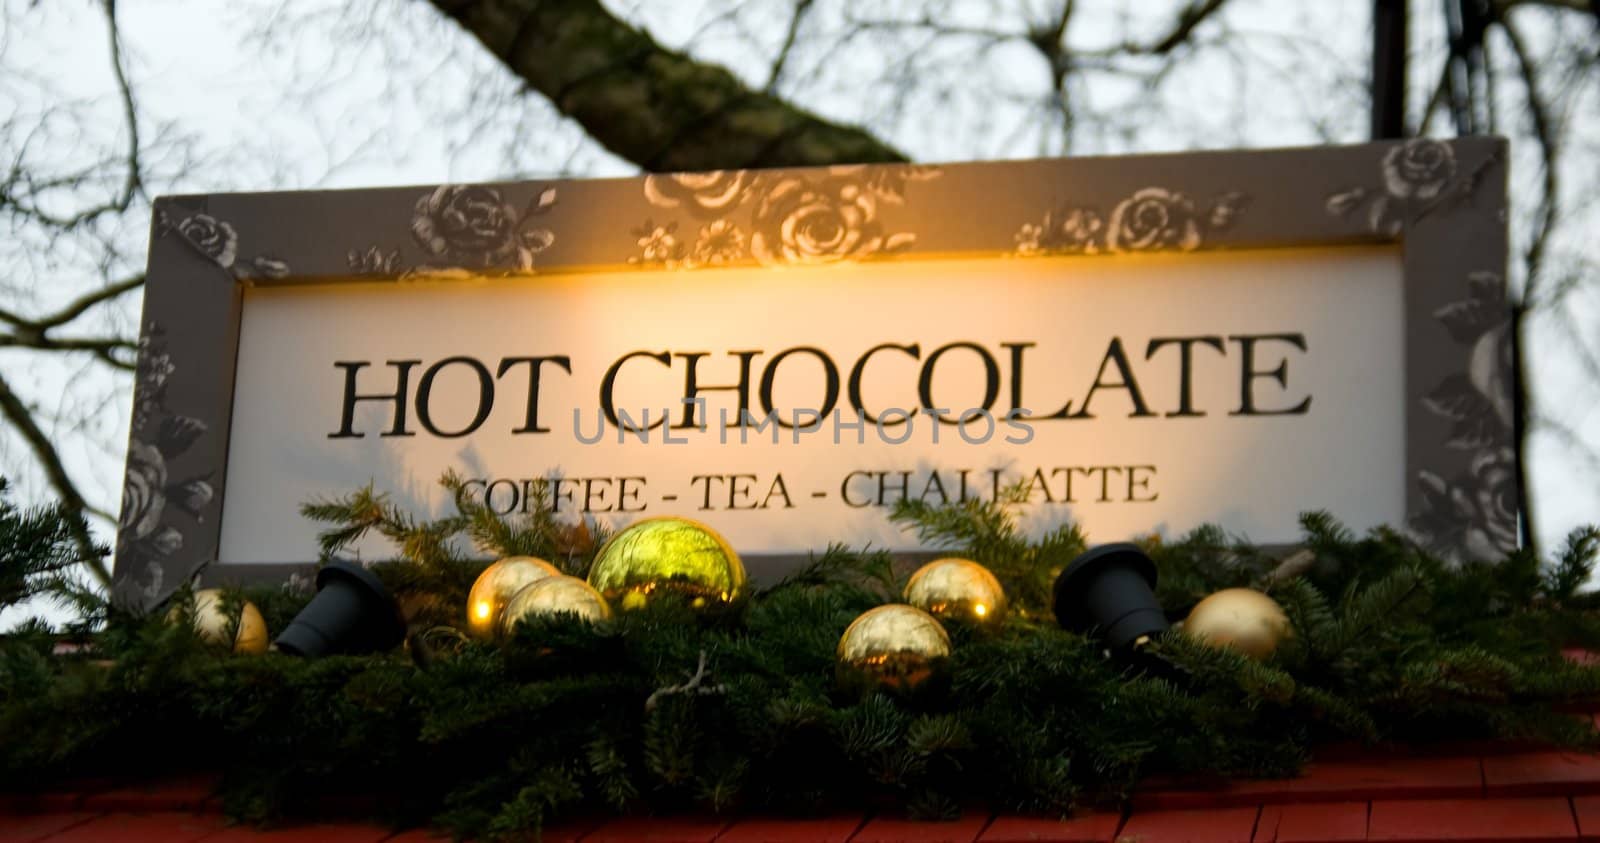 Sign with the text "HOT CHOCOLATE" by baggiovara